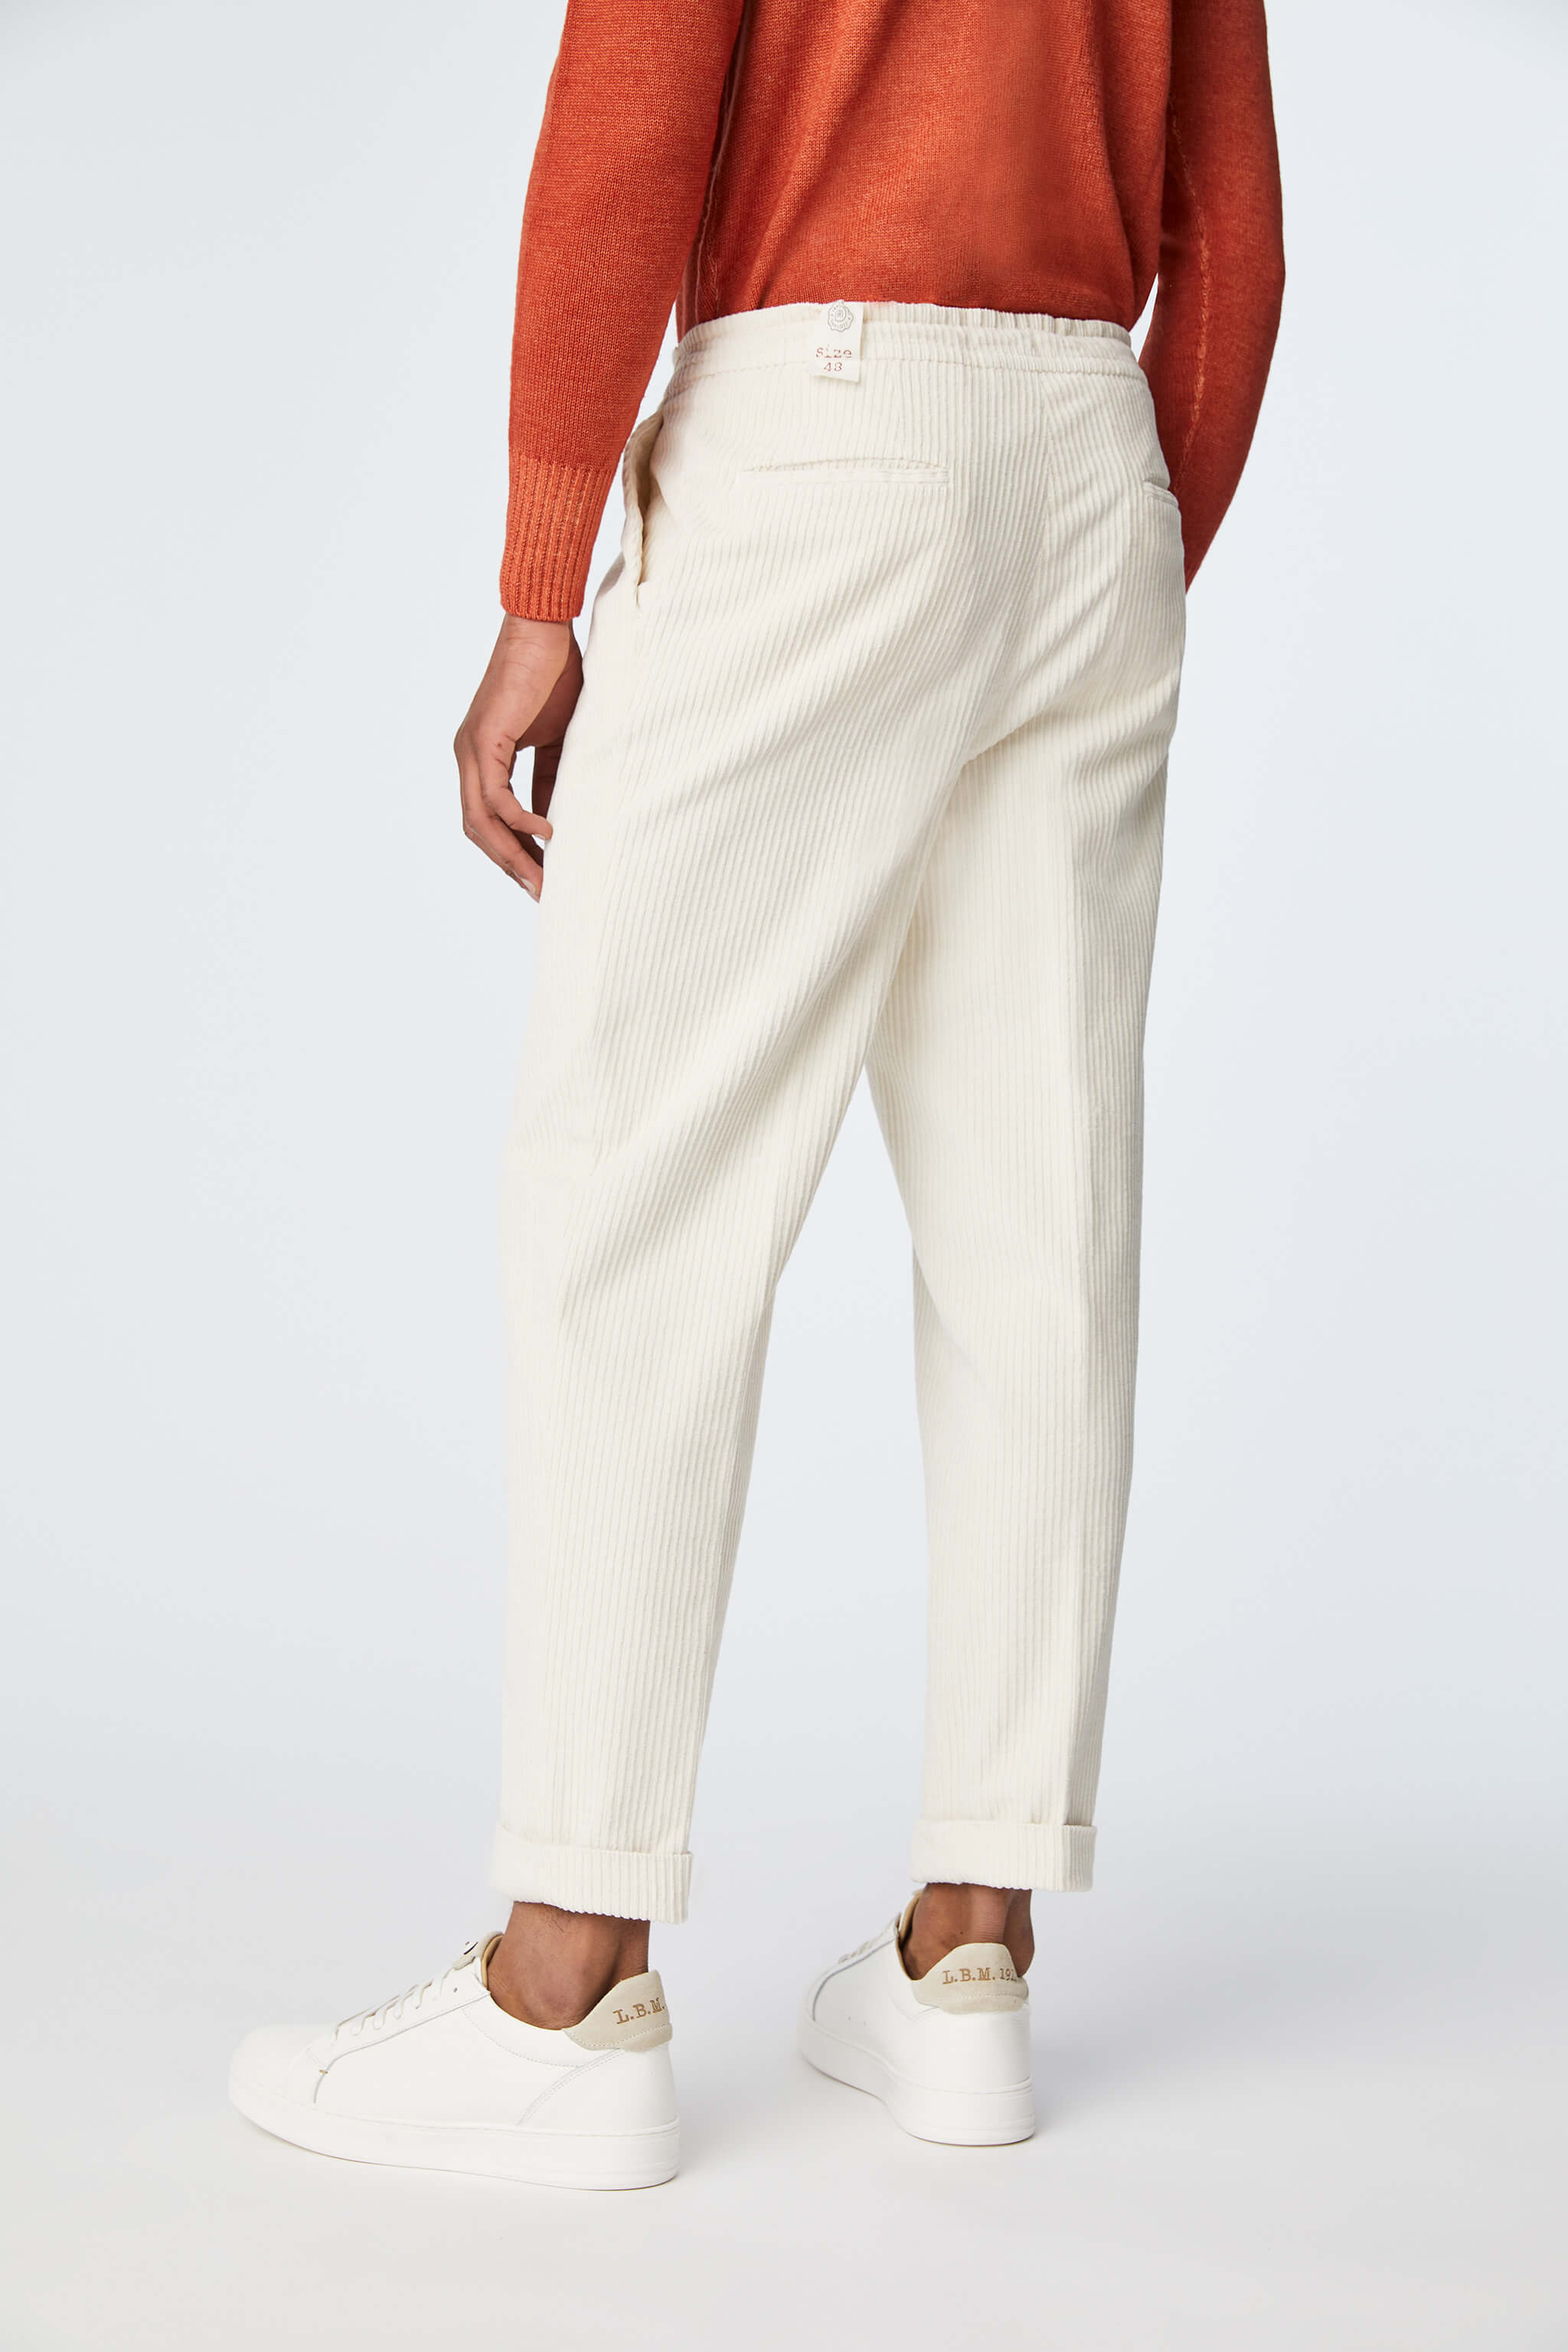 Garment-dyed LESTER pants in ivory